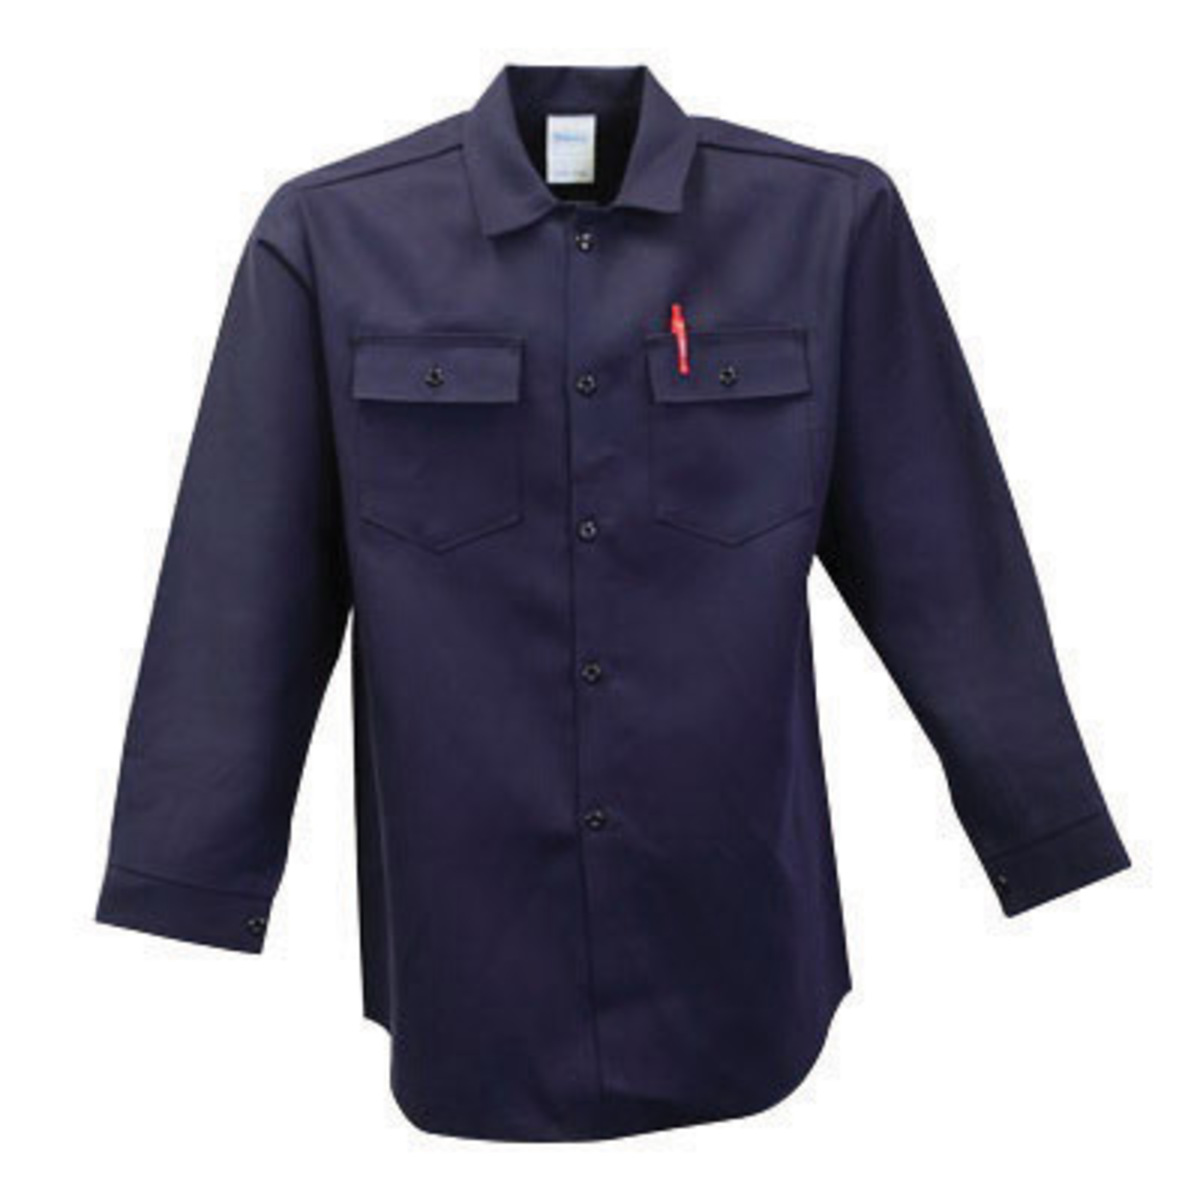 Stanco Safety Products™ Medium Navy Blue Indura® Arc Rated Flame Resistant Work Shirt With Button Closure